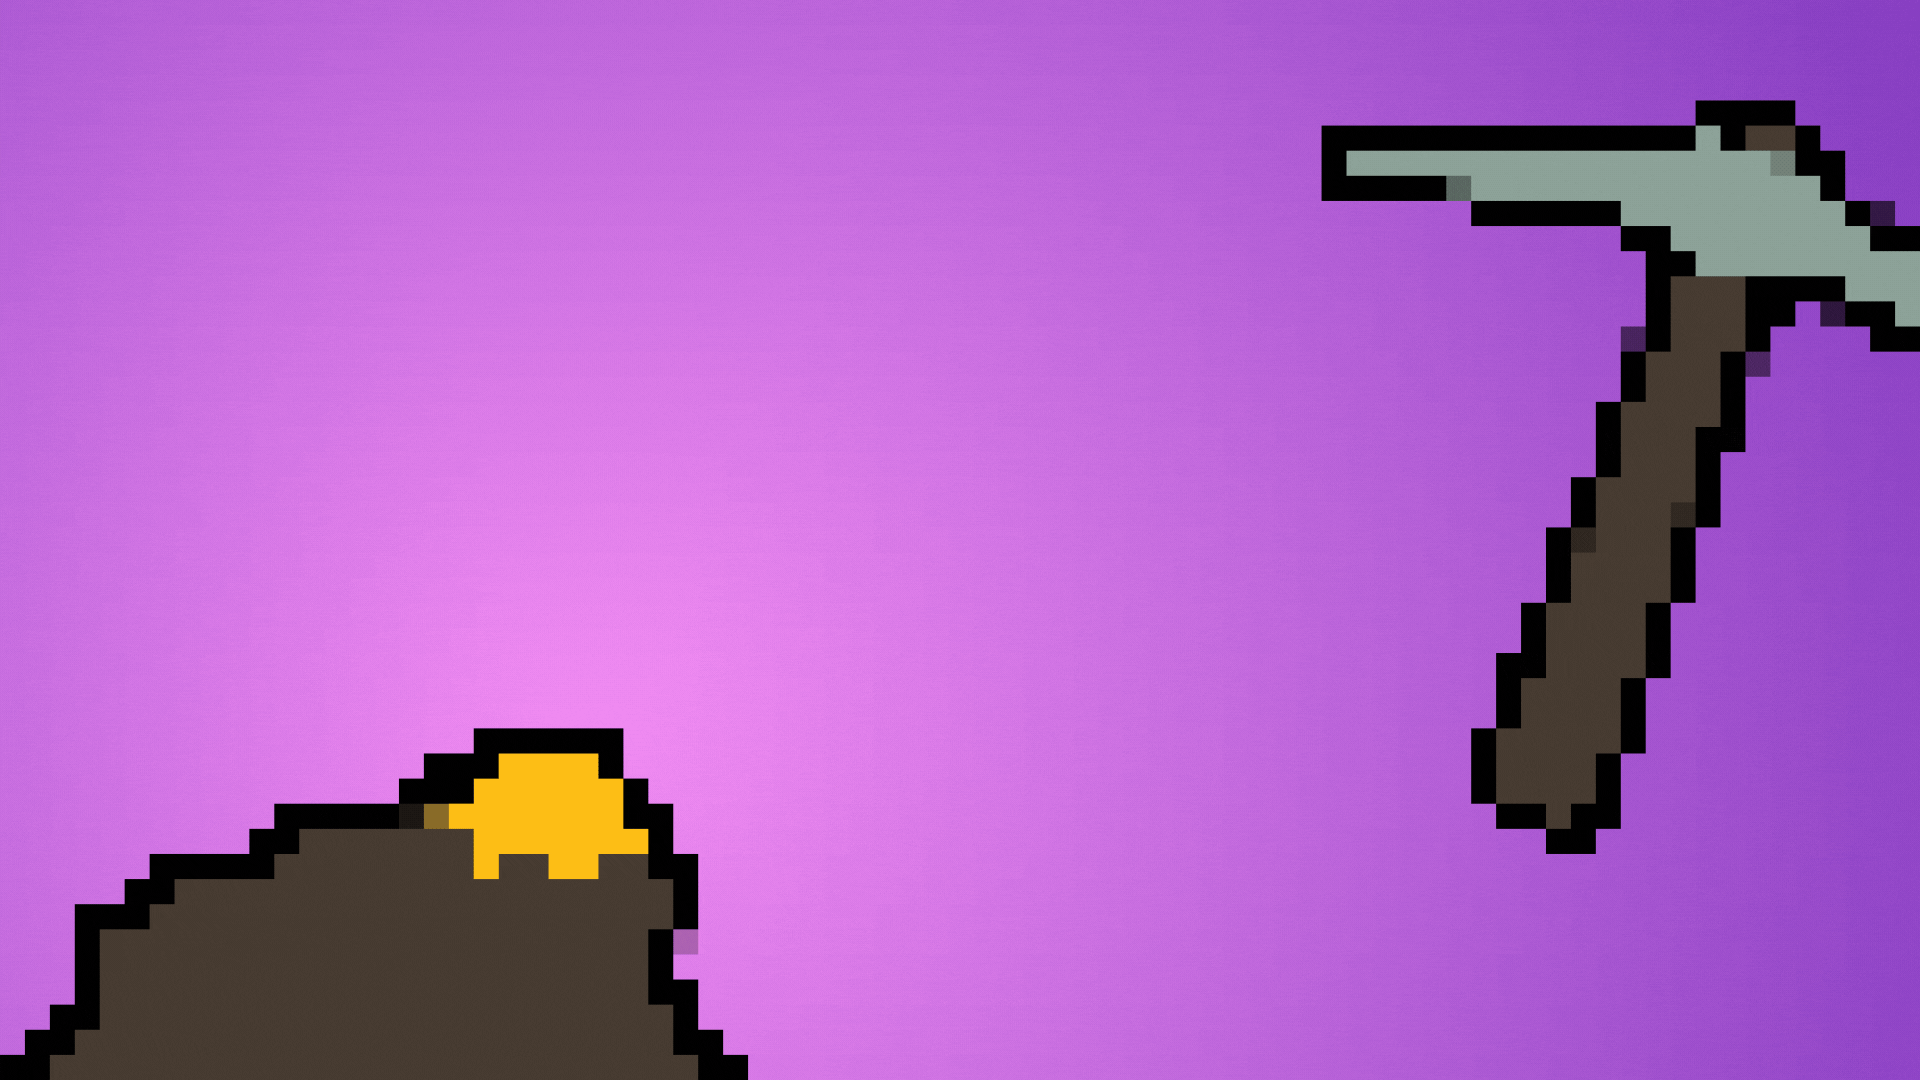 Illustration of a pixelated pickaxe hitting a pixelated rock with gold in it.